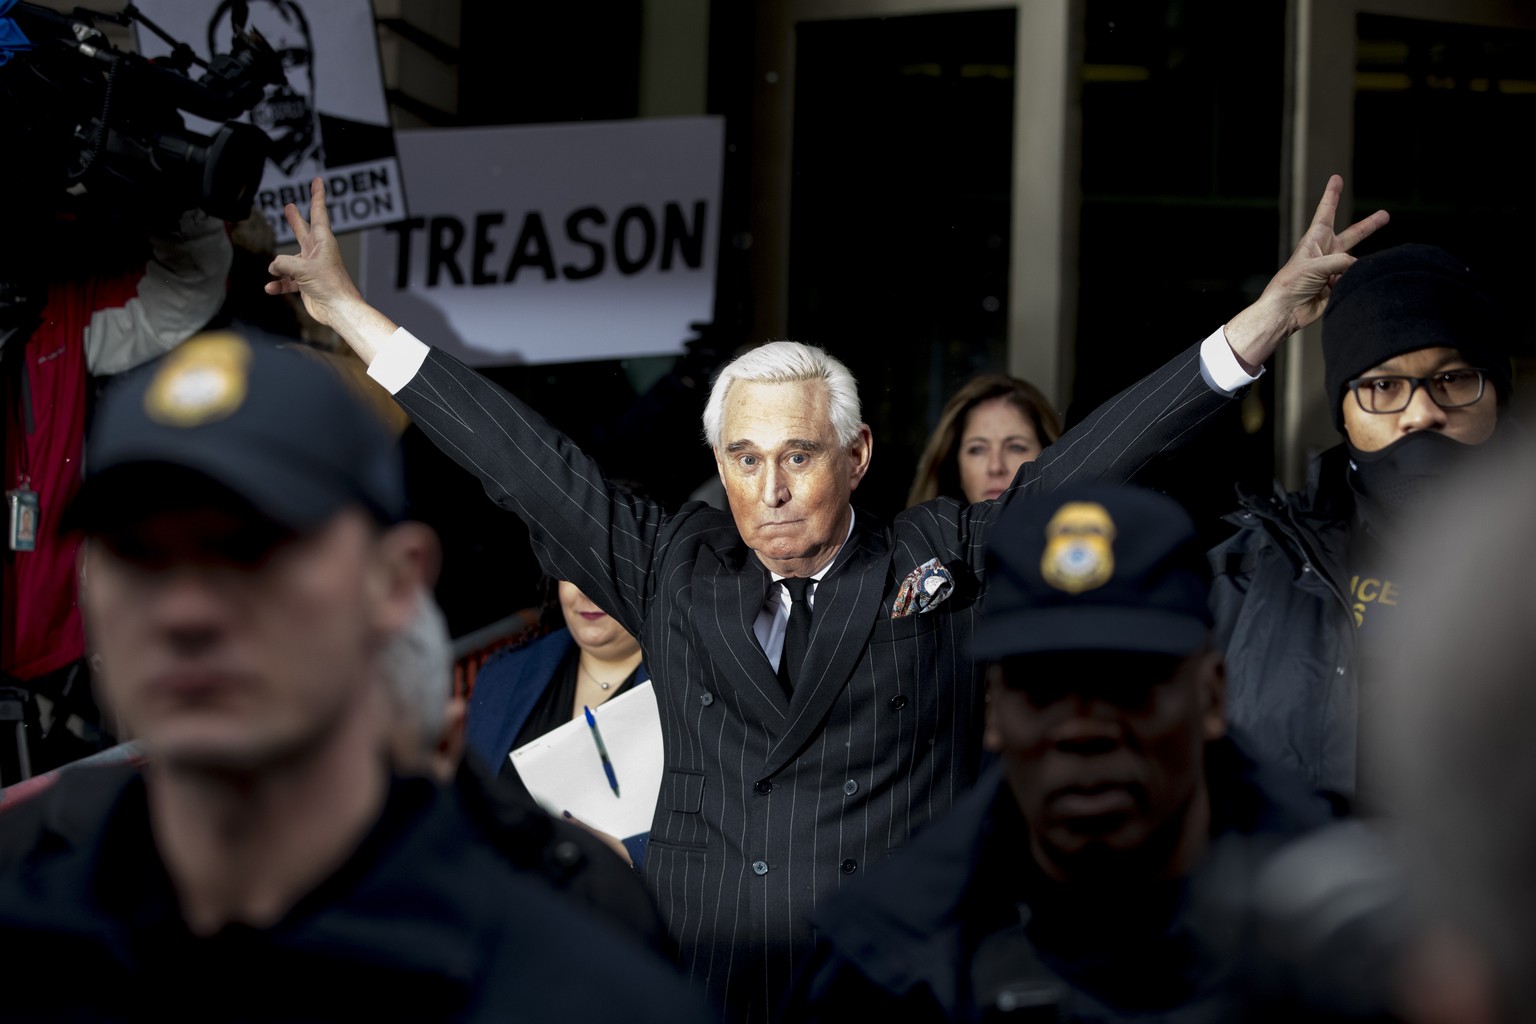 Roger Stone leaves federal court Friday, Feb. 1, 2019, in Washington. Stone appeared for a status conference just three days after he pleaded not guilty to felony charges of witness tampering, obstruc ...